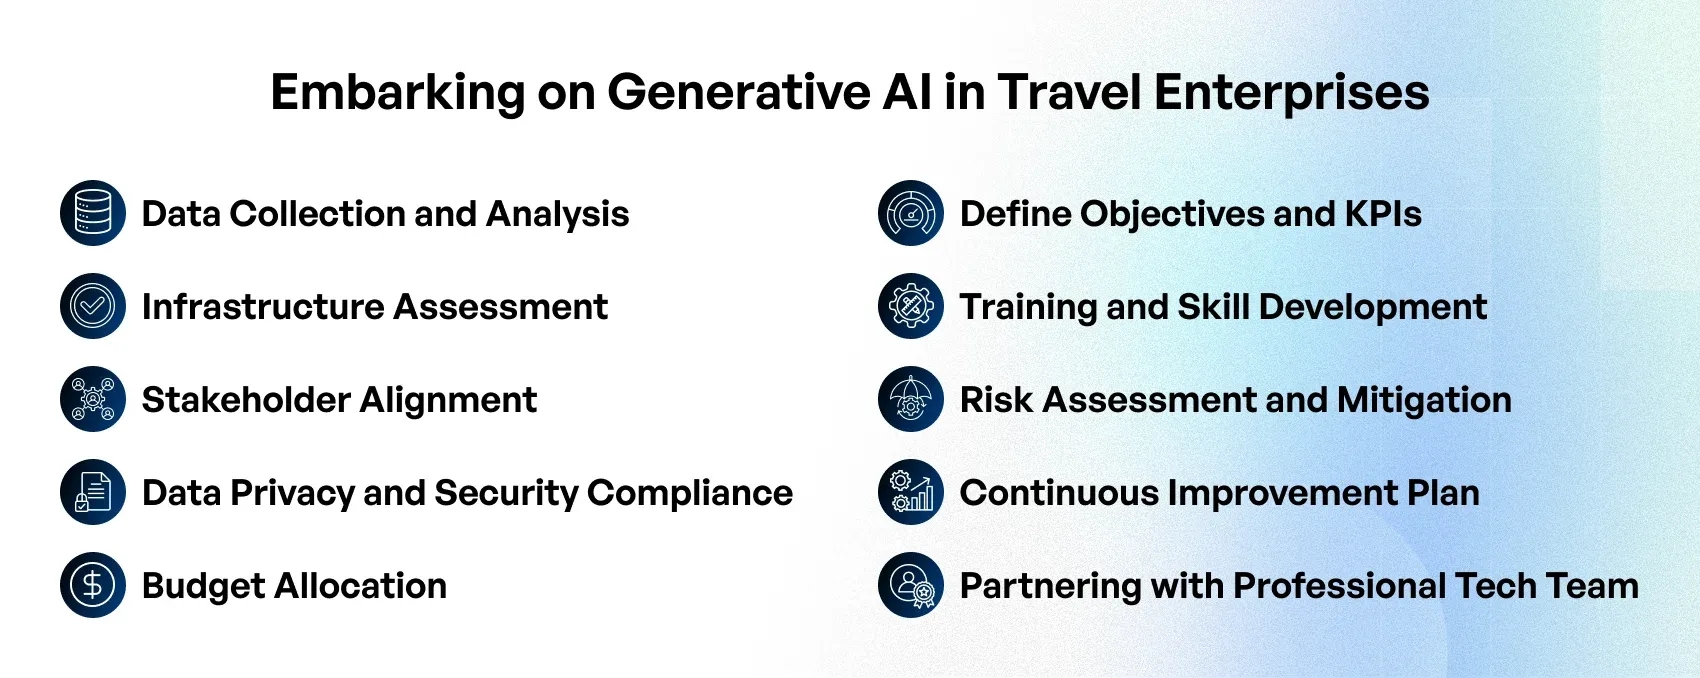 Getting Started with Generative AI in Travel Companies